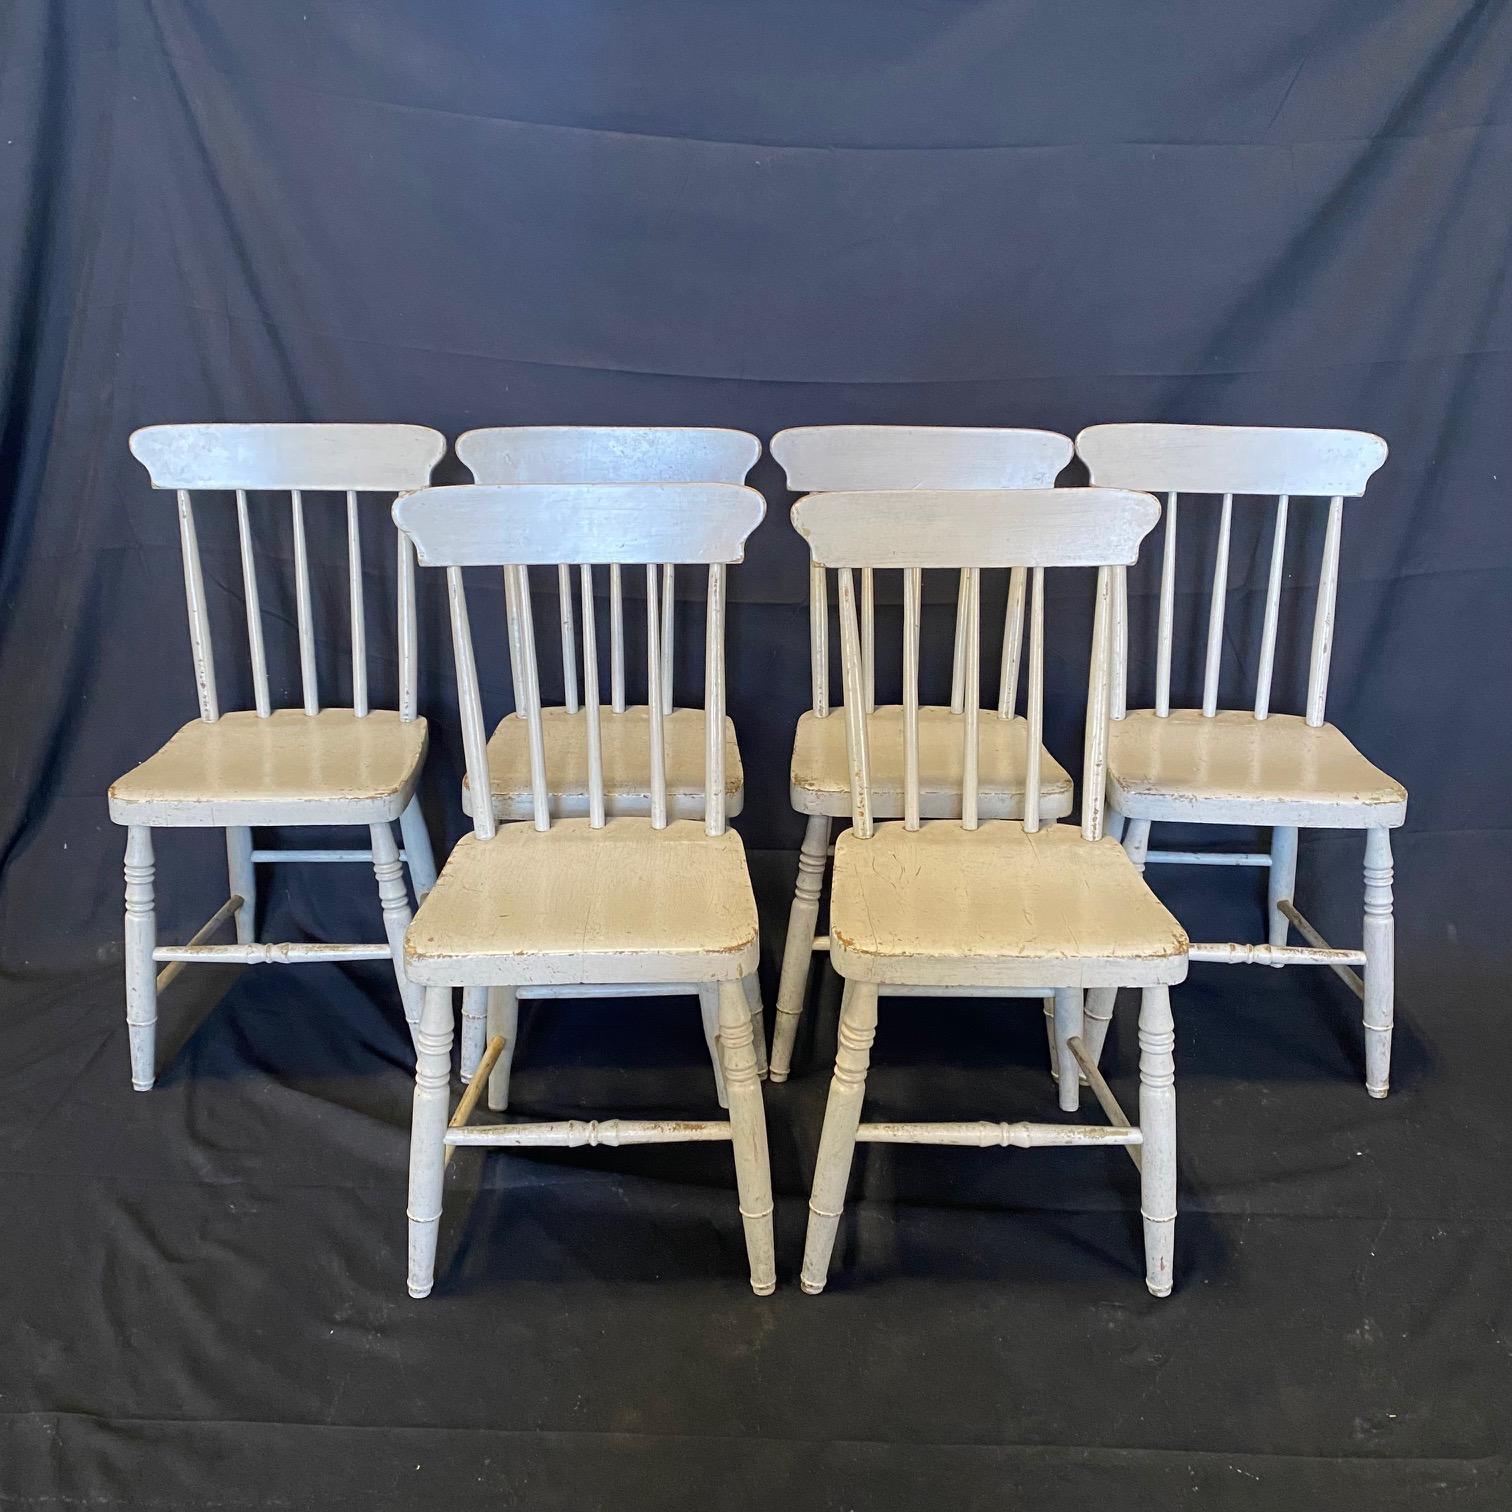  Set of Twelve 19th Century Painted Plank Seat Grange Chairs from Maine 4